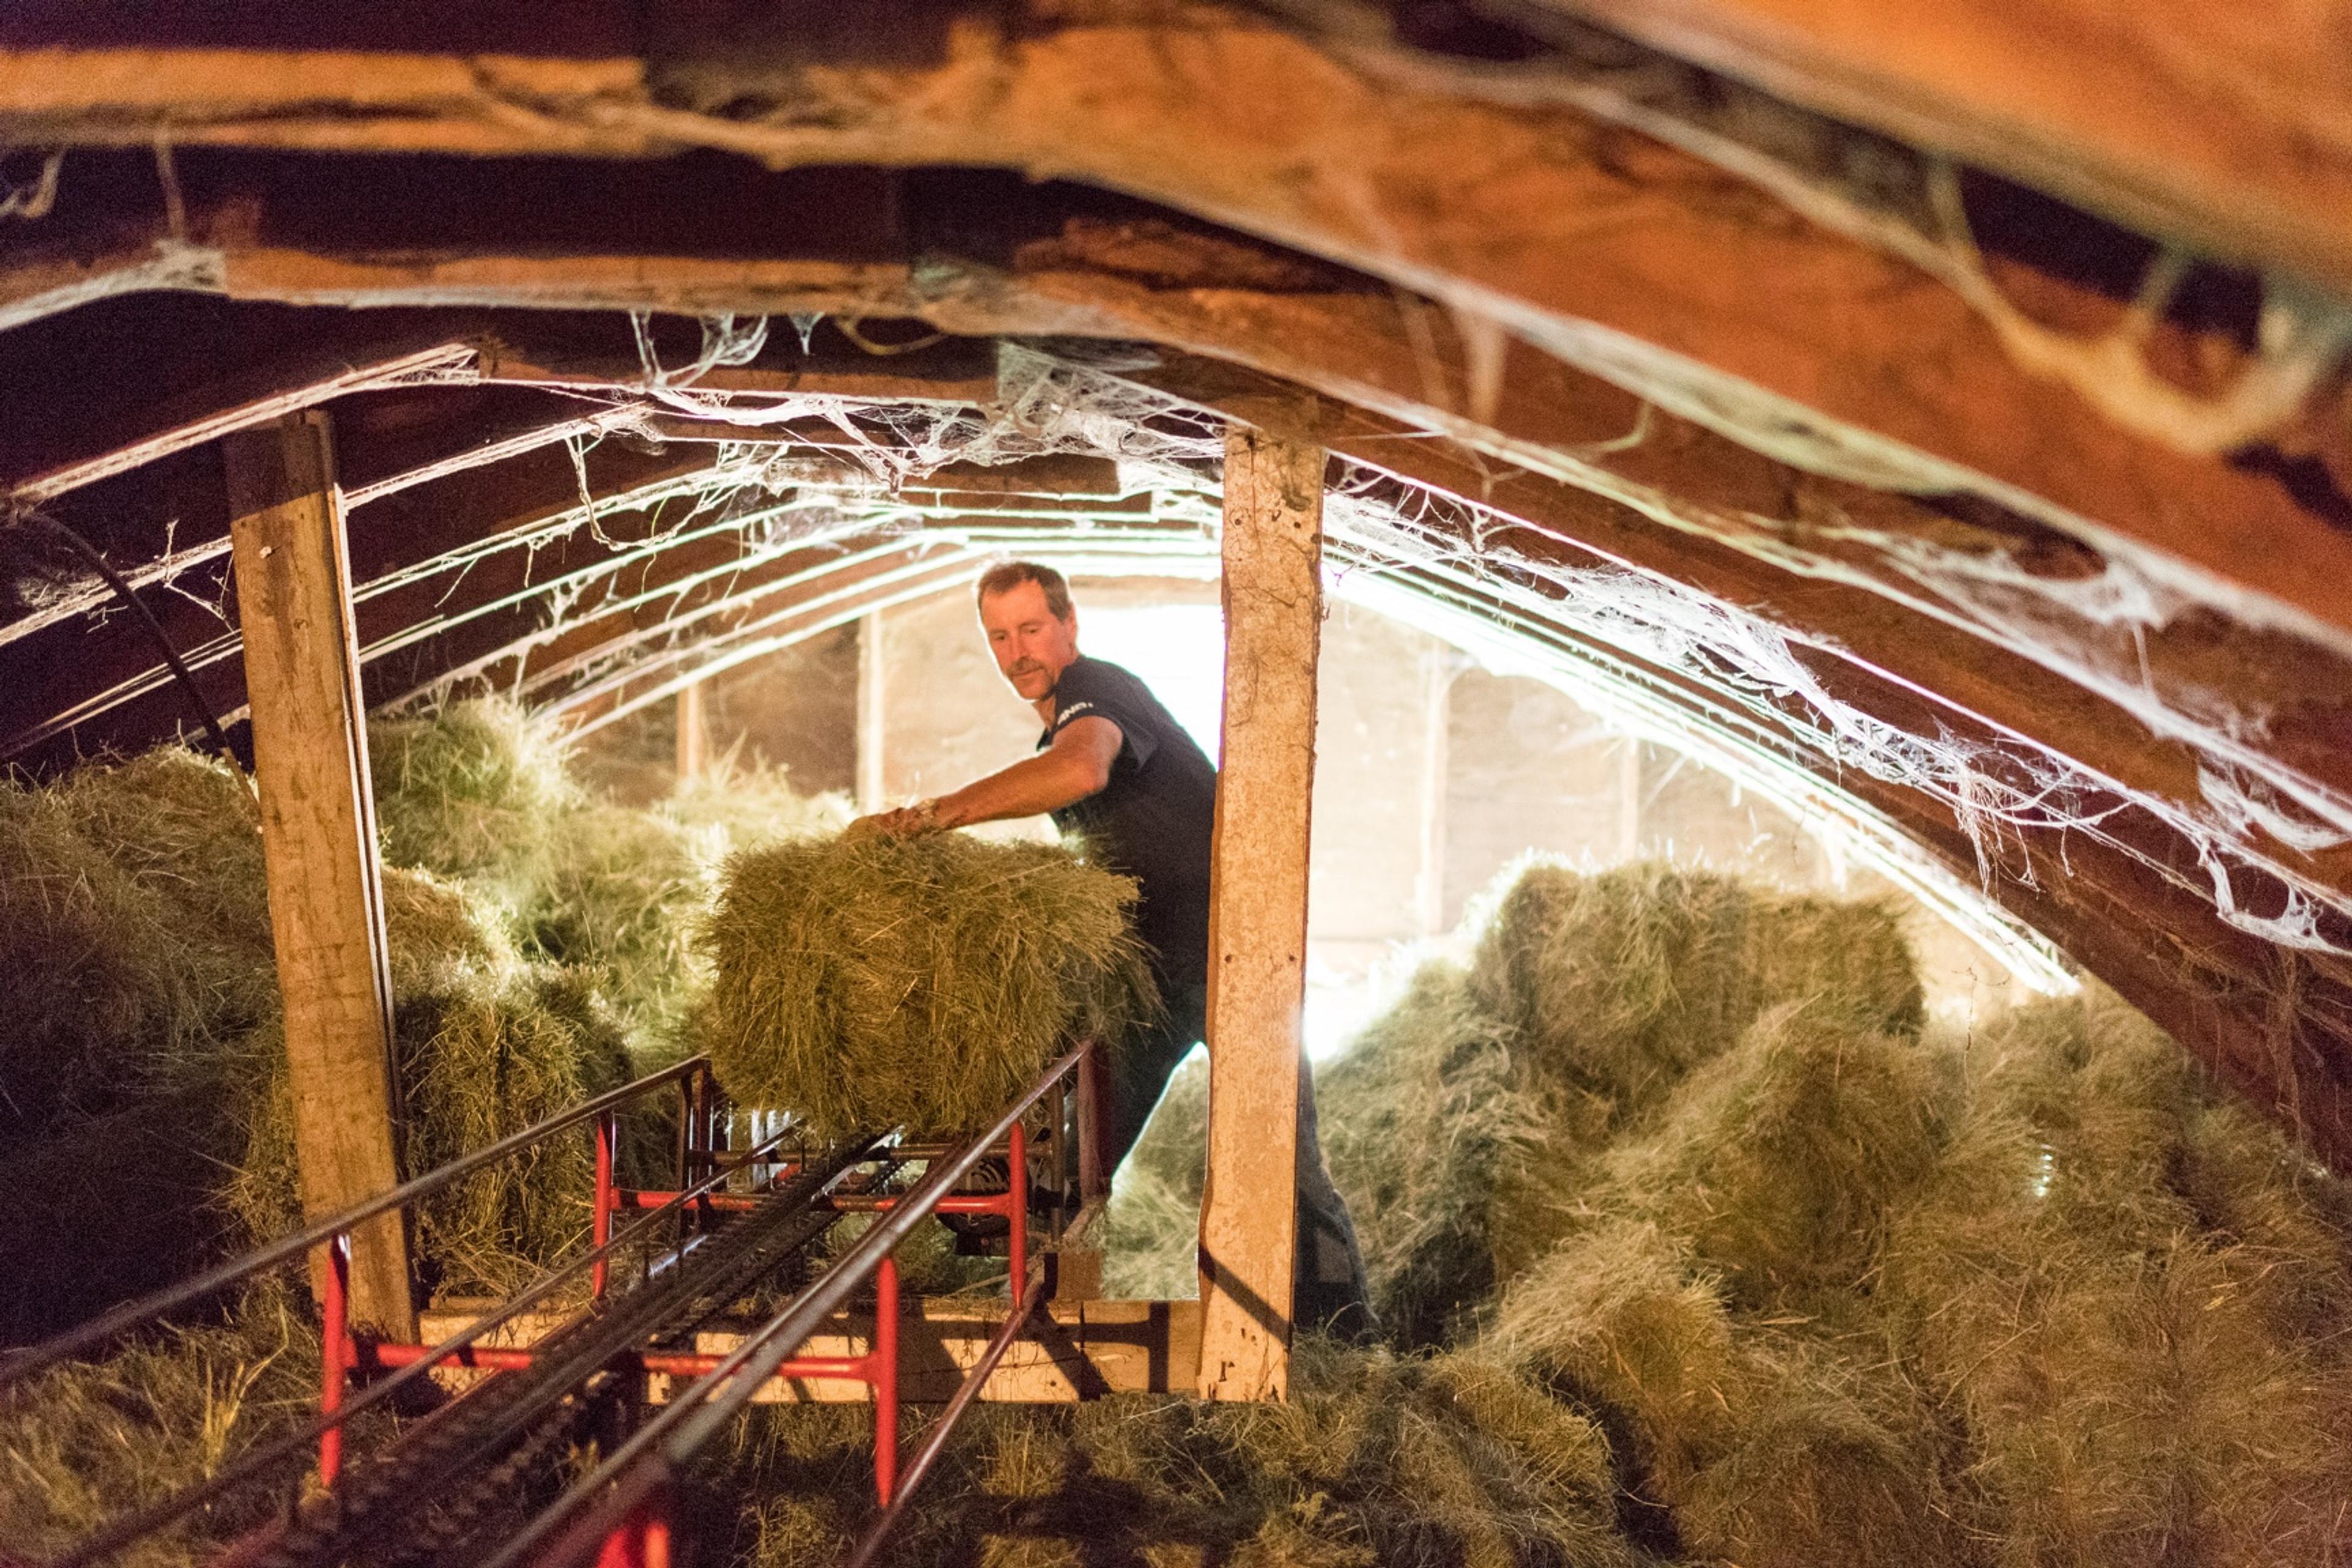 Neal Klaphake stacks hay in a cramped hayloft of the organic family farm barn.